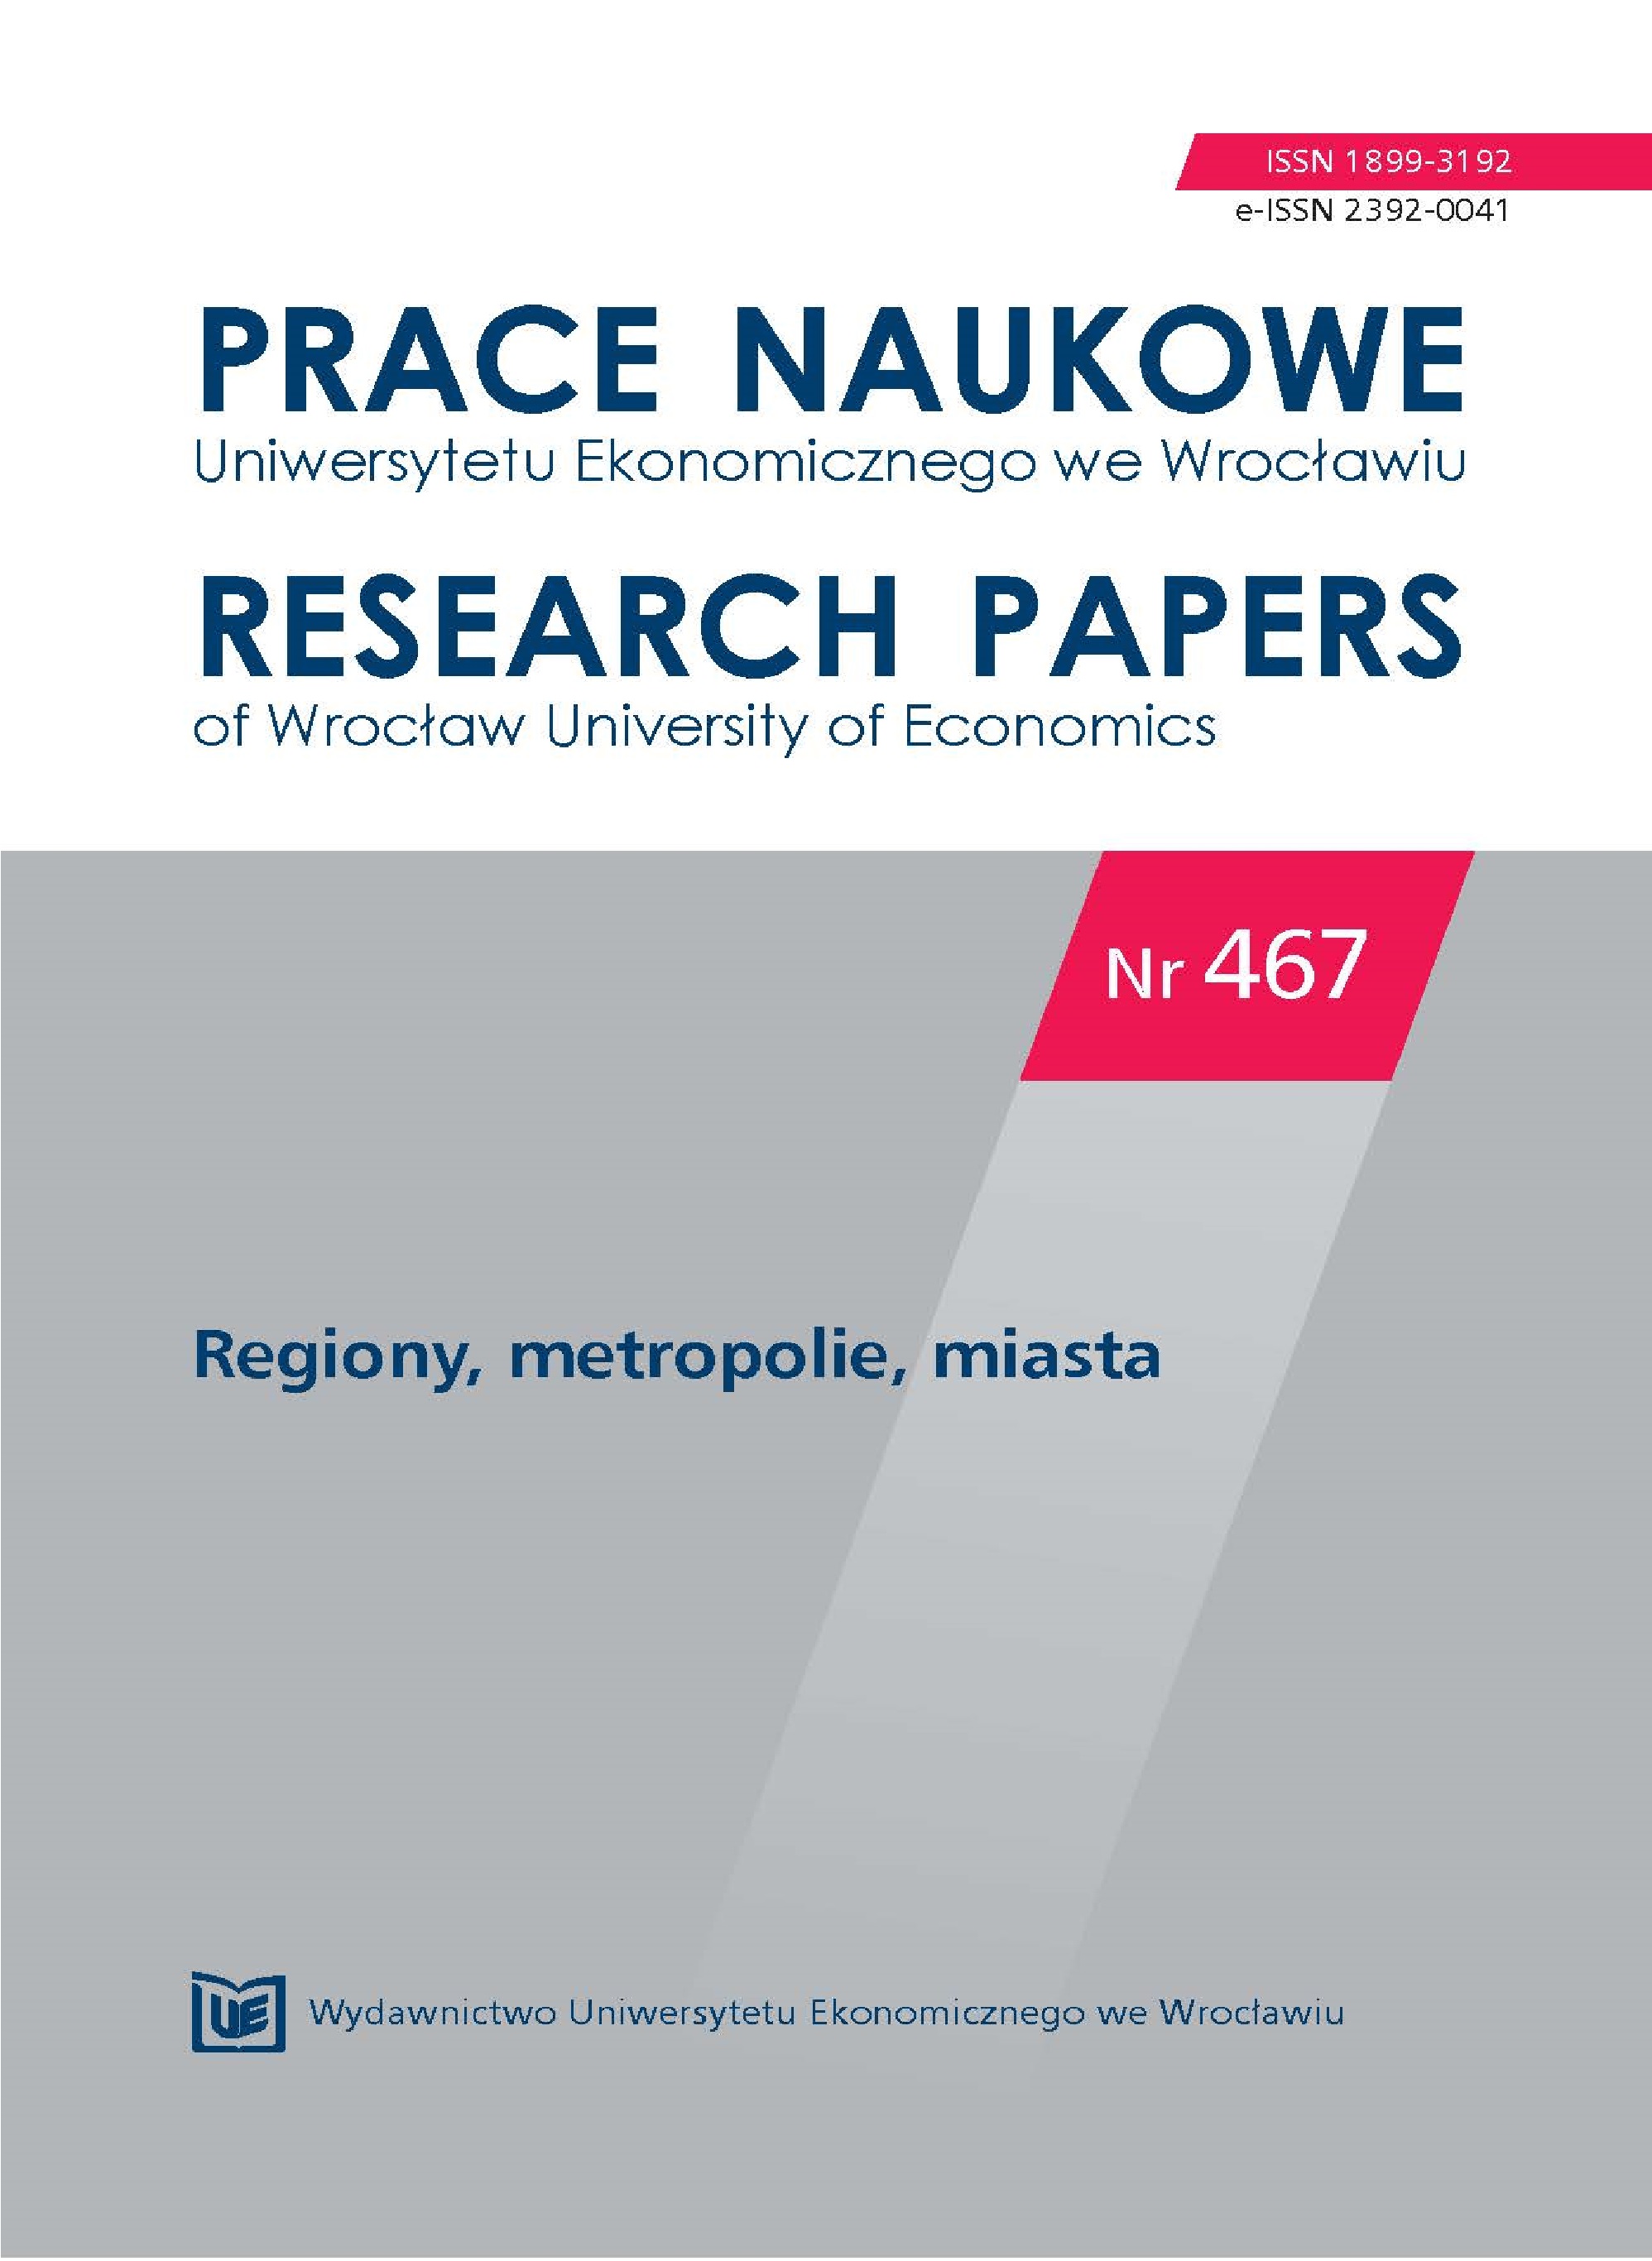 Possibilities of using rivers in the social and
economic development of Wrocław Cover Image